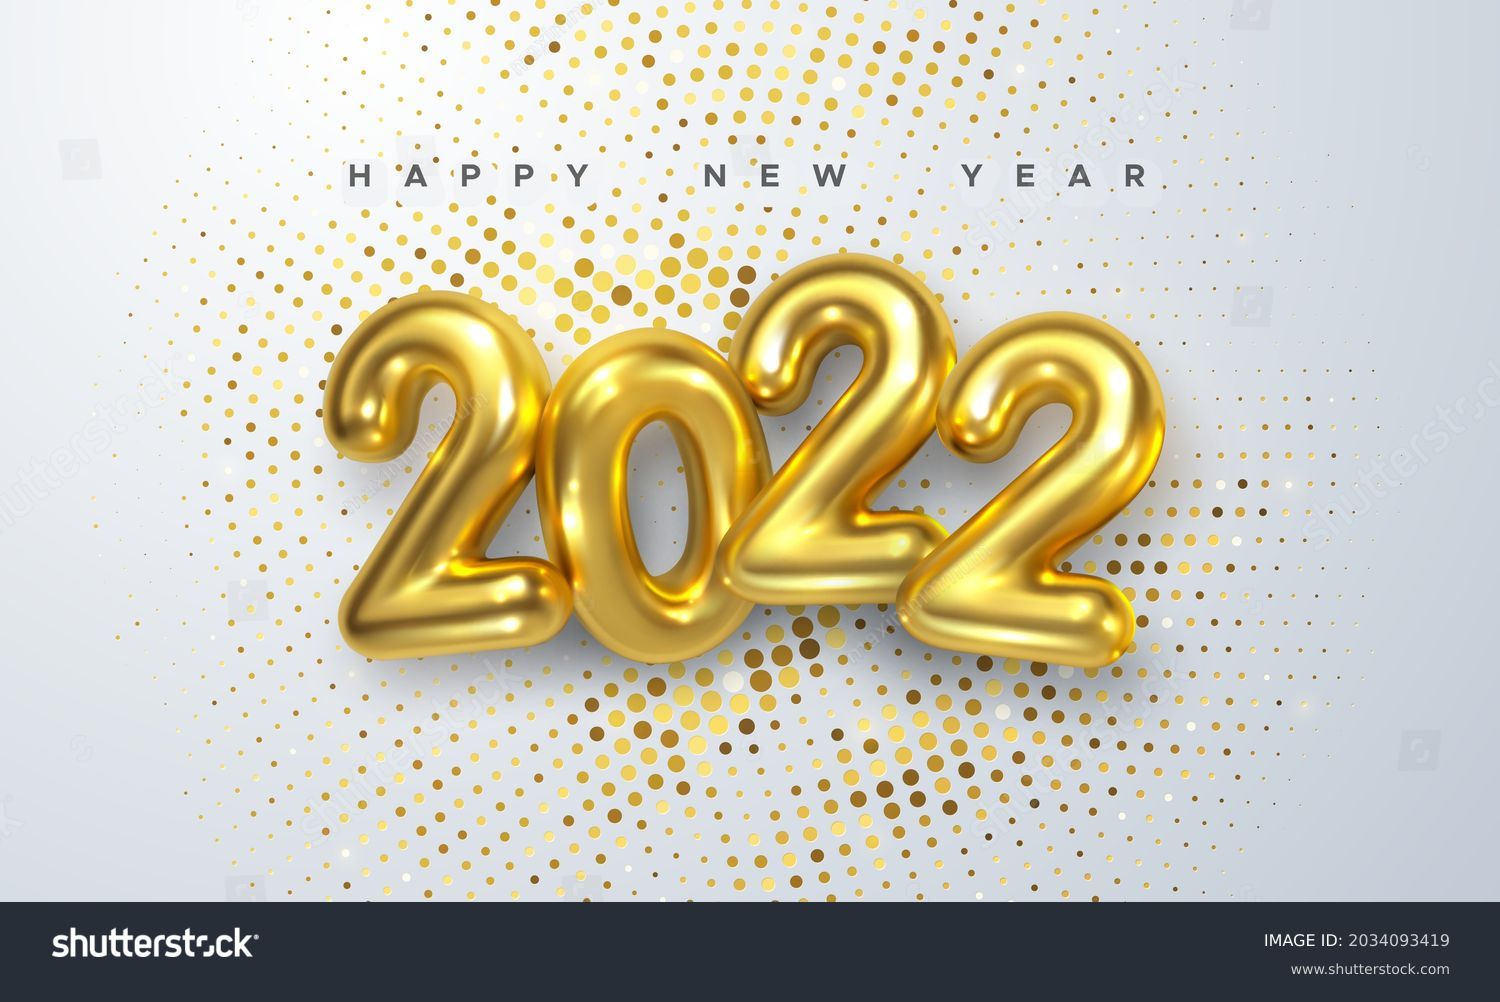 Happy New 2022 Year. Holiday vector illustration of golden metallic numbers 2022 and sparkling glitters pattern. Realistic 3d sign. Festive poster or banner design #2034093419